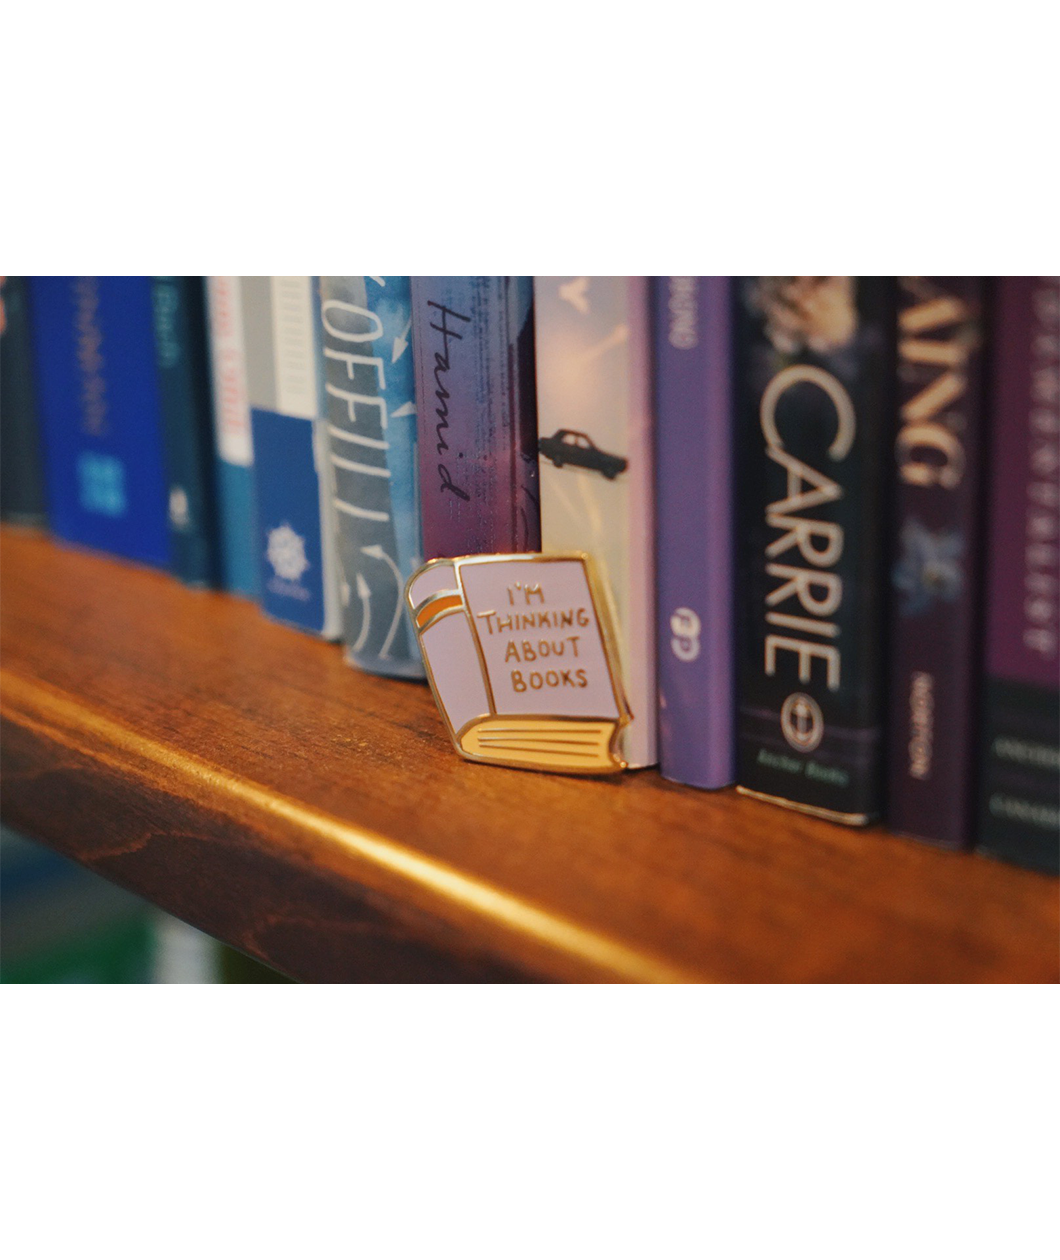 A gold and purple pin shaped like a book. The cover of the book says "I'm thinking about books" in front of books on a bookshelf. From Ariel Bissett.